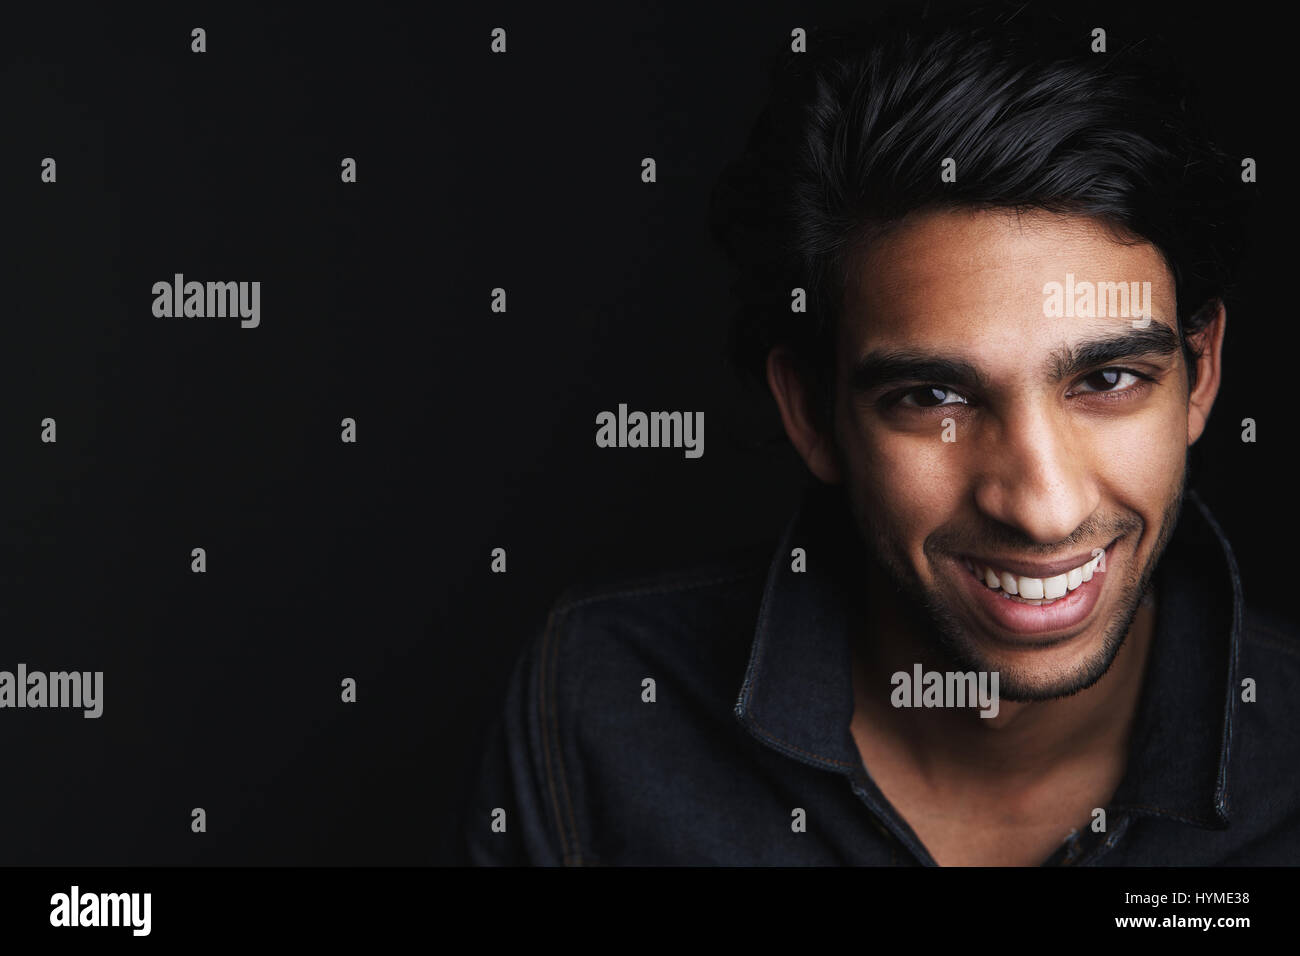 Close up portrait of a cheerful young man laughing on black background Stock Photo